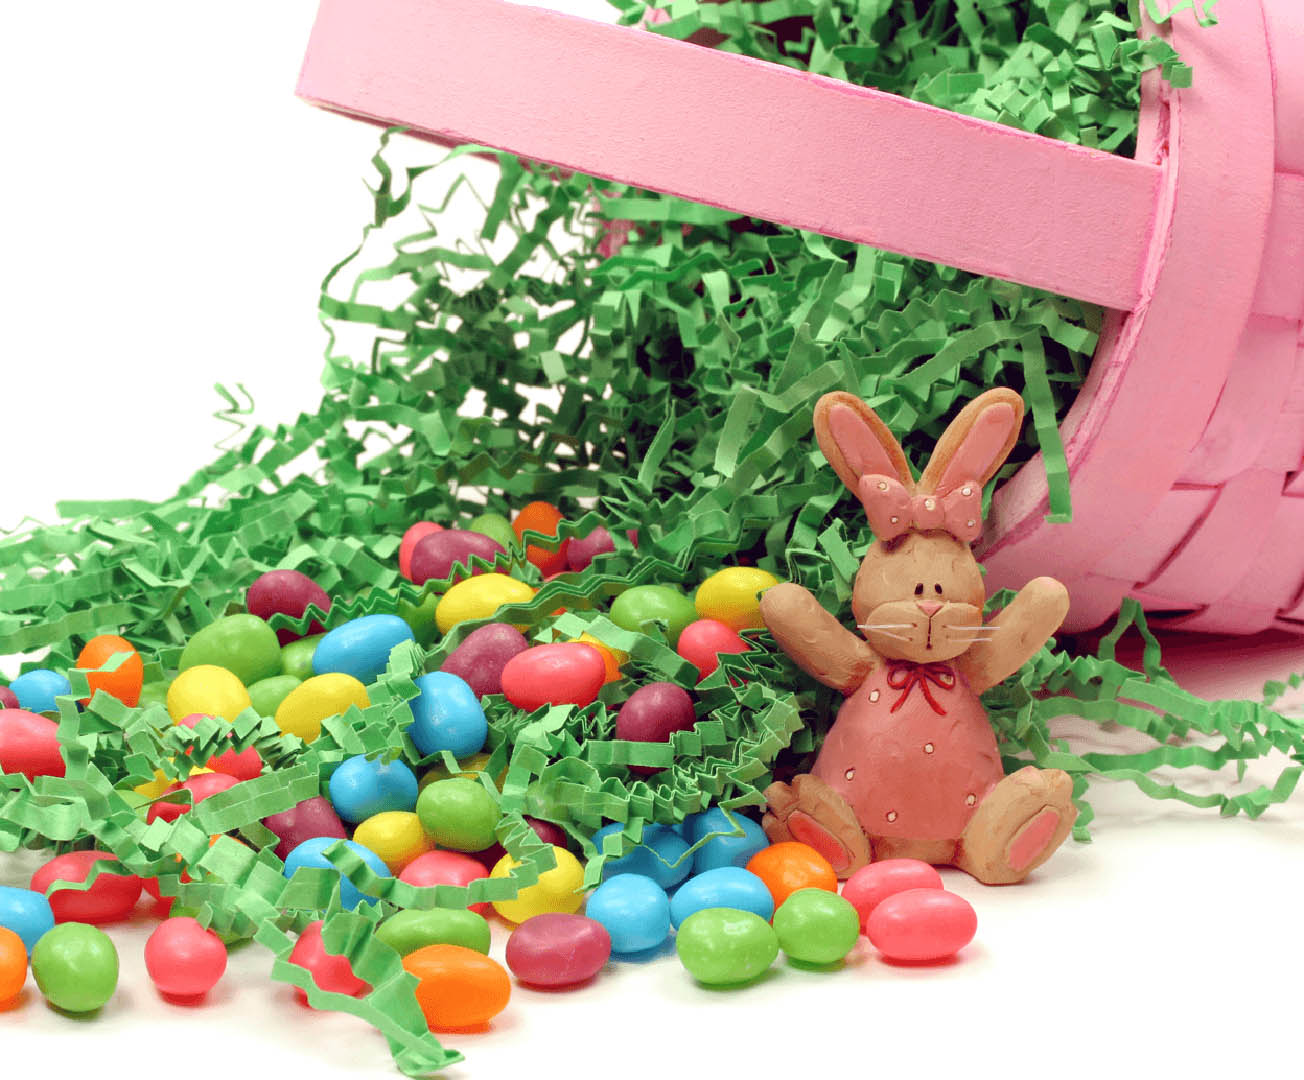 Fun Family Easter Traditions to Try This Year Basket Image